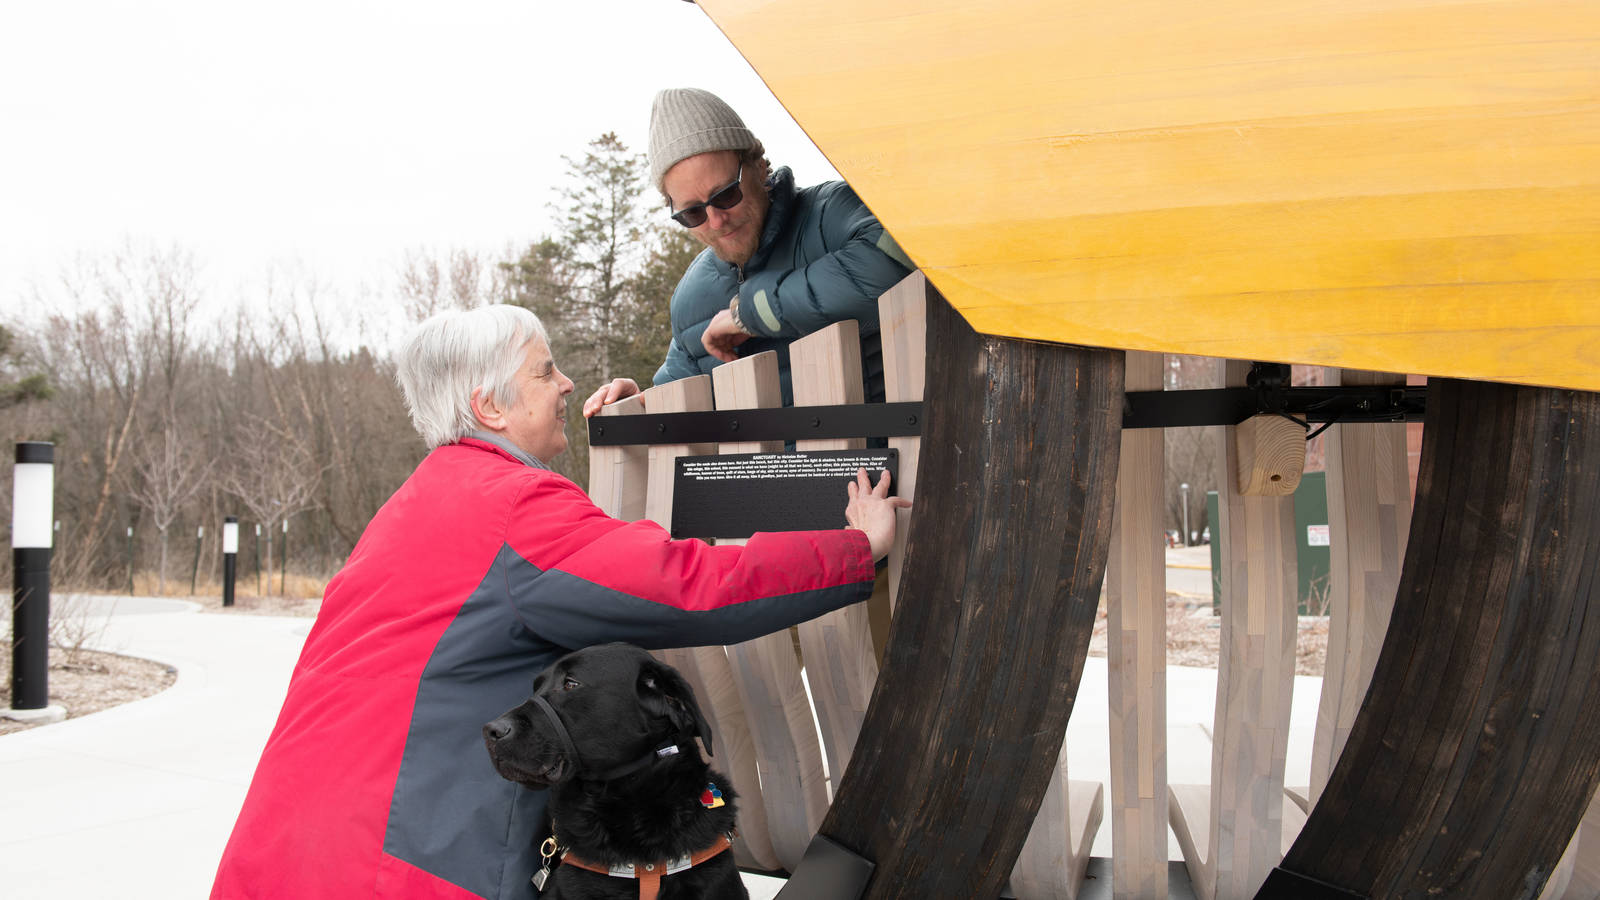 Local artist Joe Maurer and counselor emerita Kathie Schneider with Seeing Eye Dog Calvin explore the Braille plaque installation that features Nick Butler’s poem, Sanctuary, which is also inscribed in the bench’s upper interior.